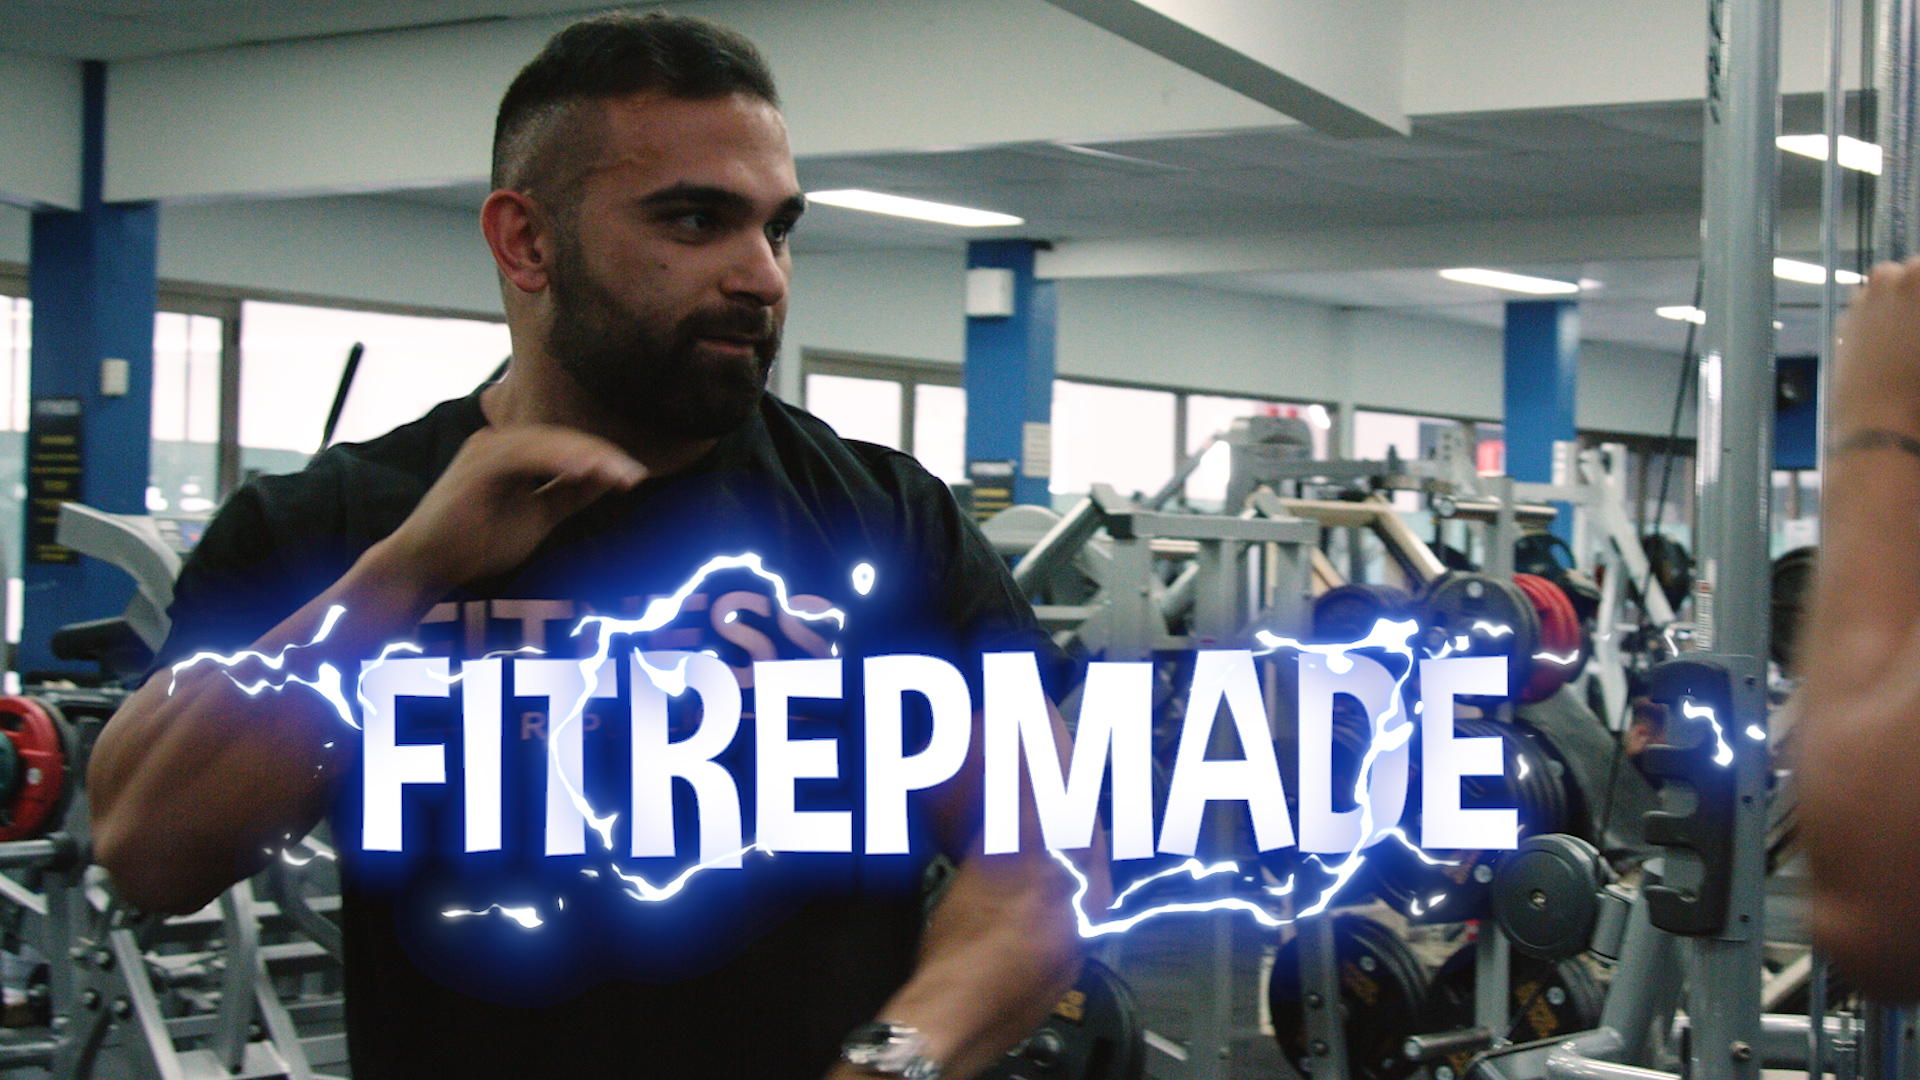 The Founder fitness republic video series online